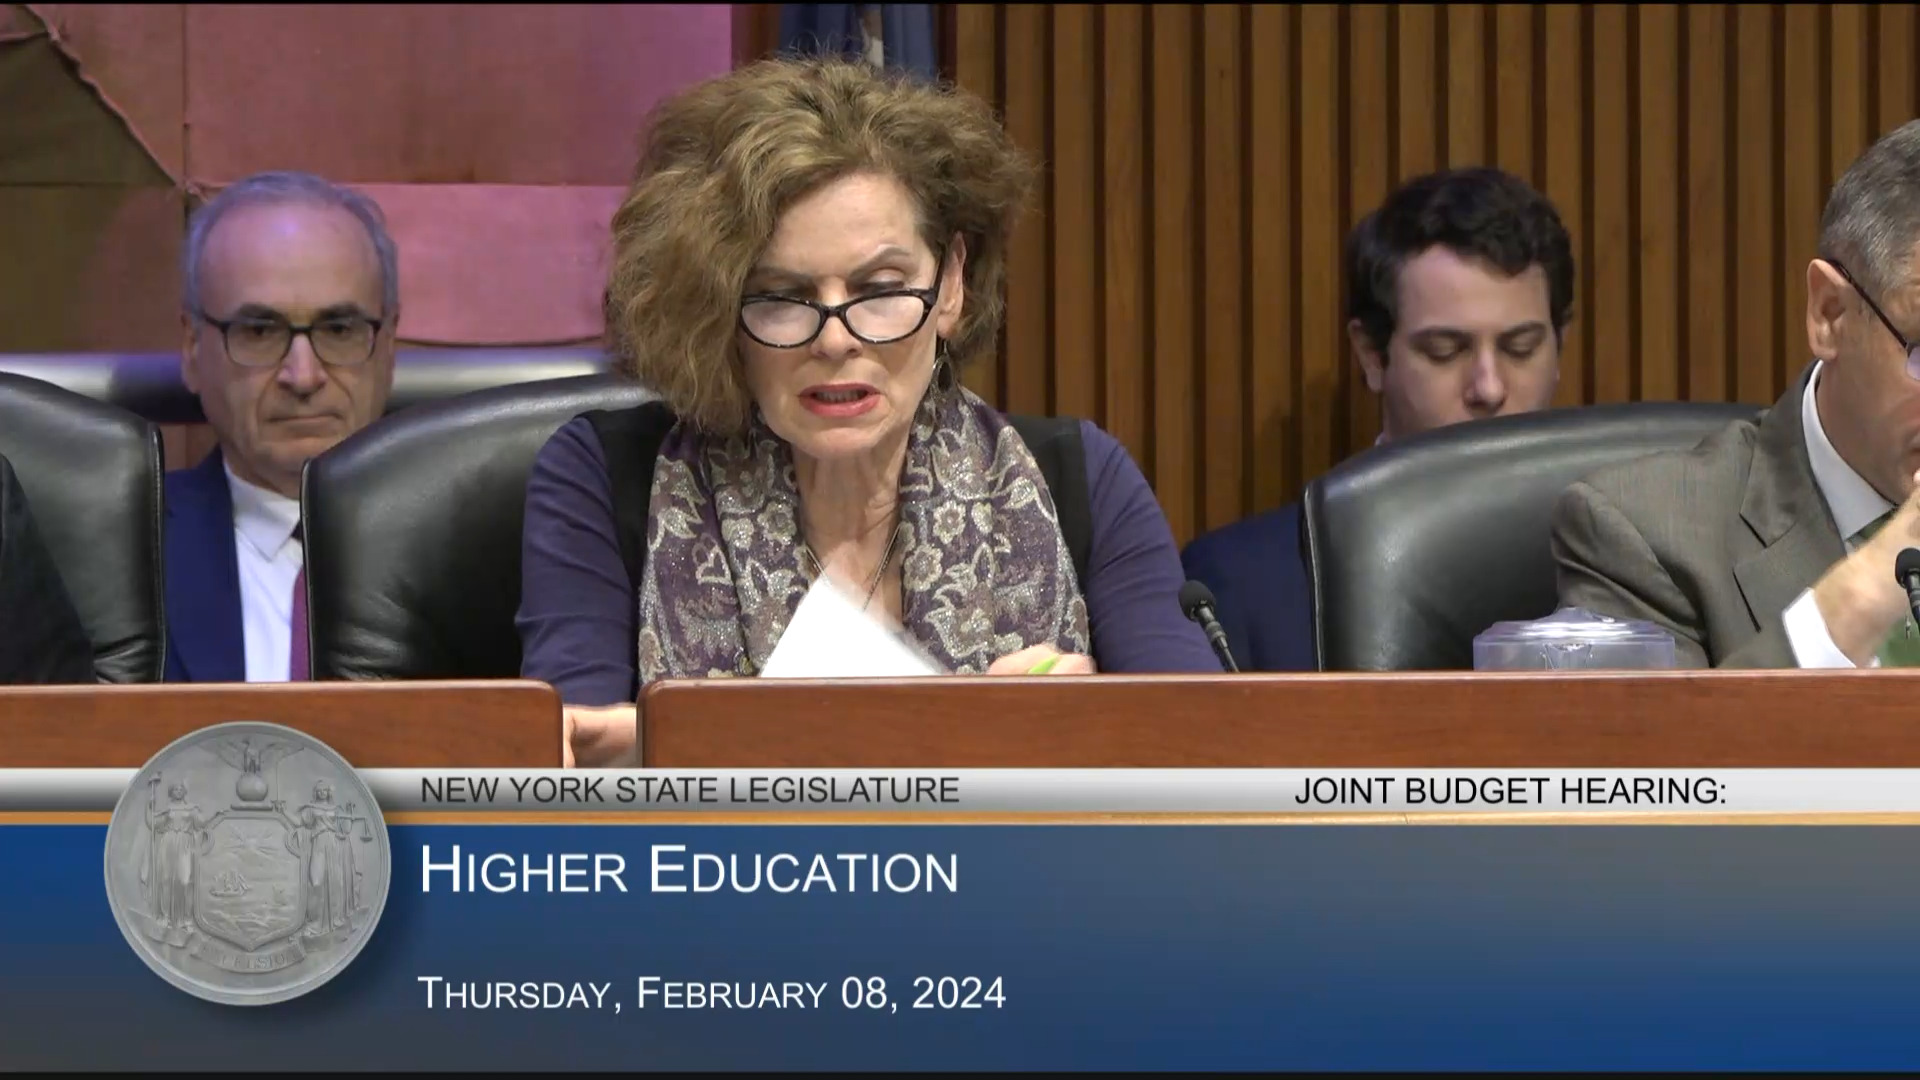 NYS Higher Education Services Corporation President Testifies During Budget Hearing on Higher Education